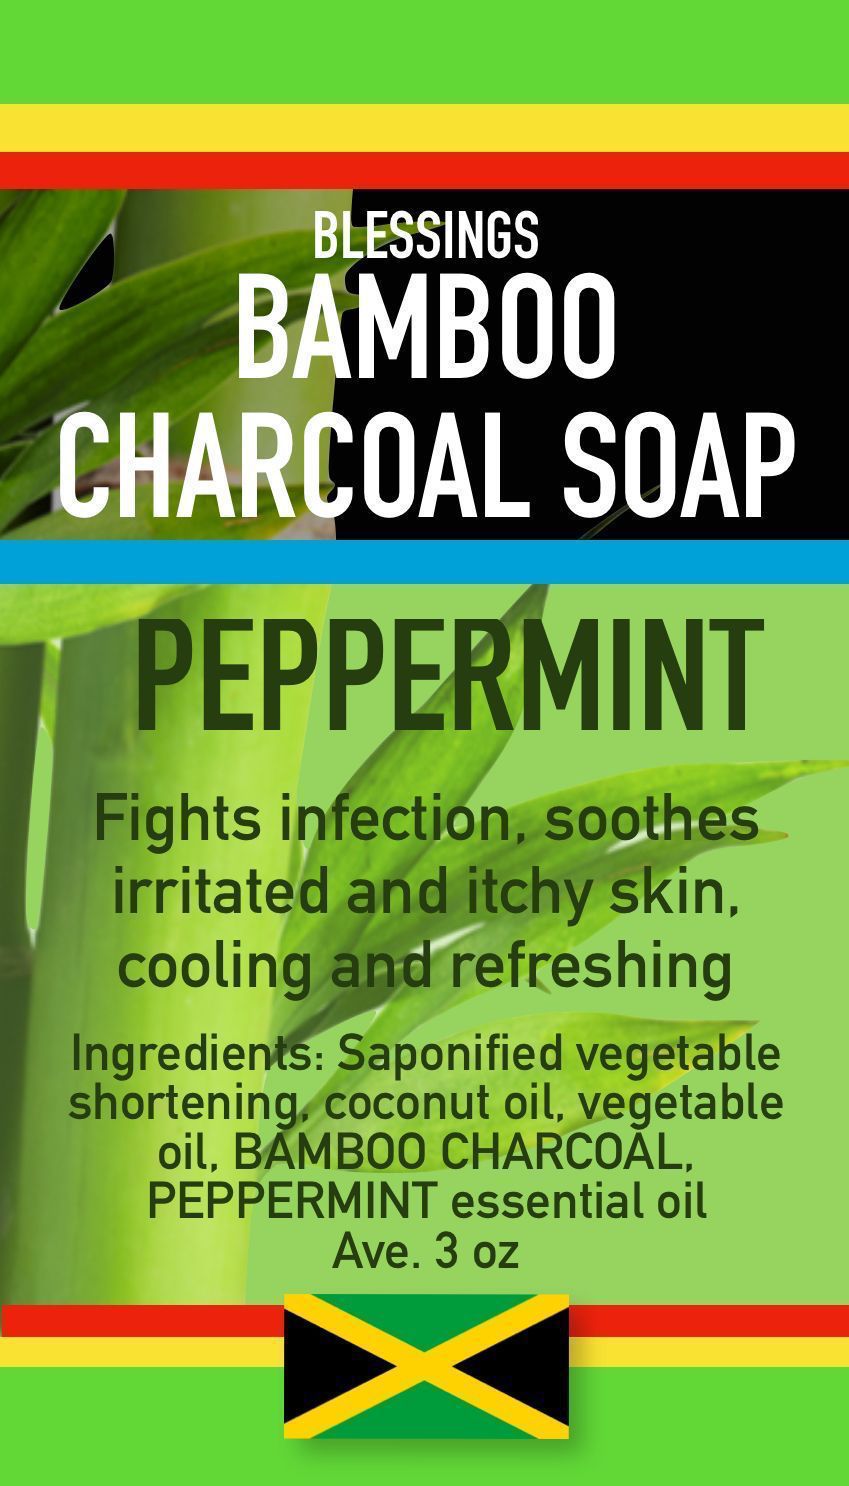 Bamboo Charcoal Peppermint Soap